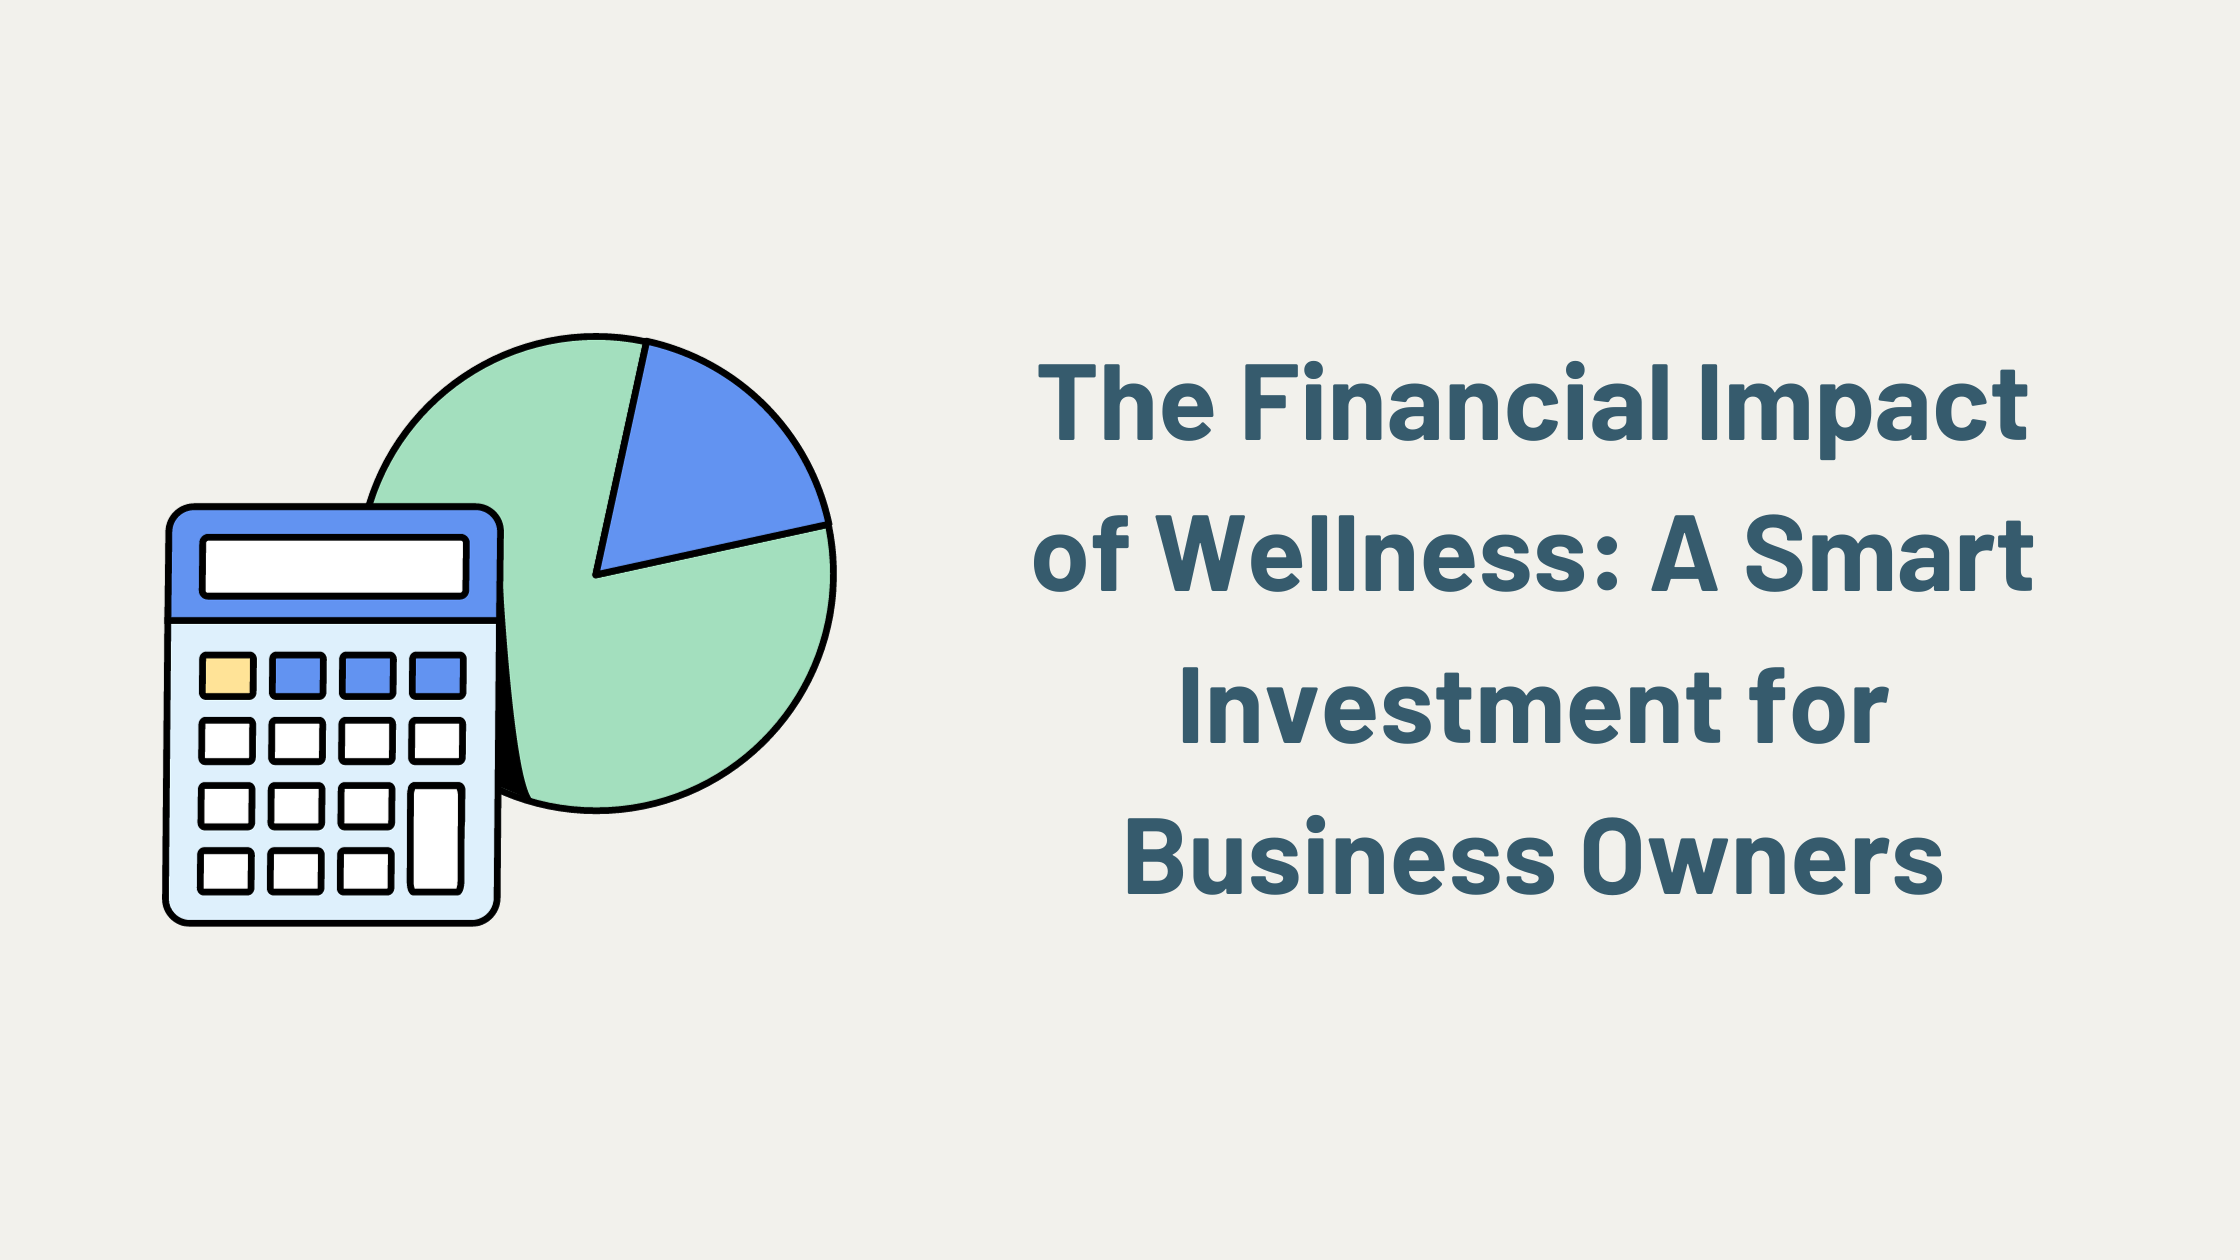 The Financial Impact of Wellness: A Smart Investment for Business Owners